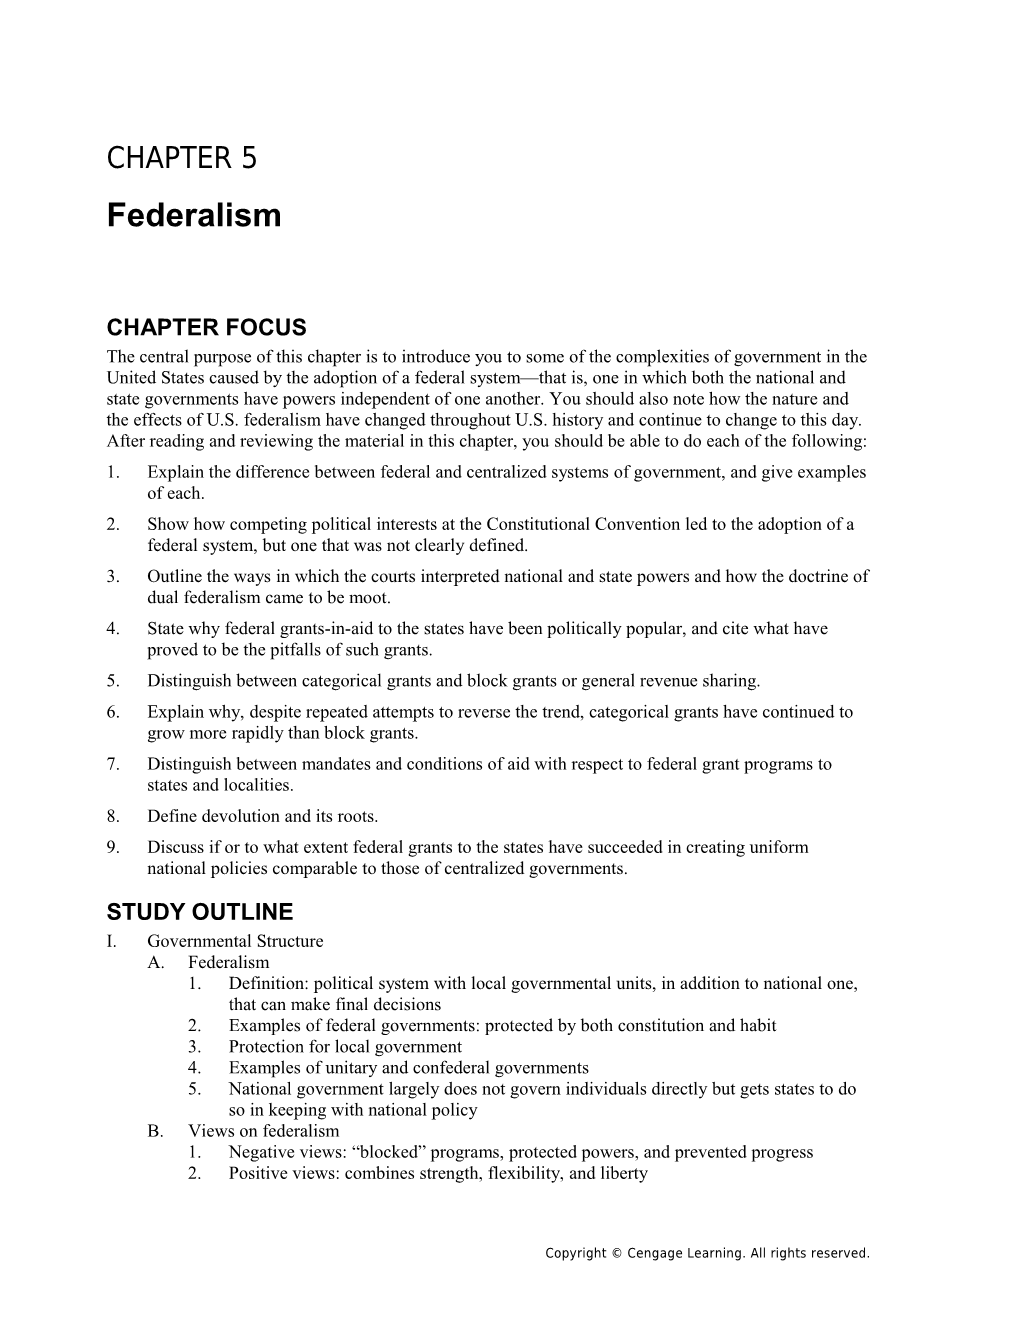 Chapter 5: Federalism 1